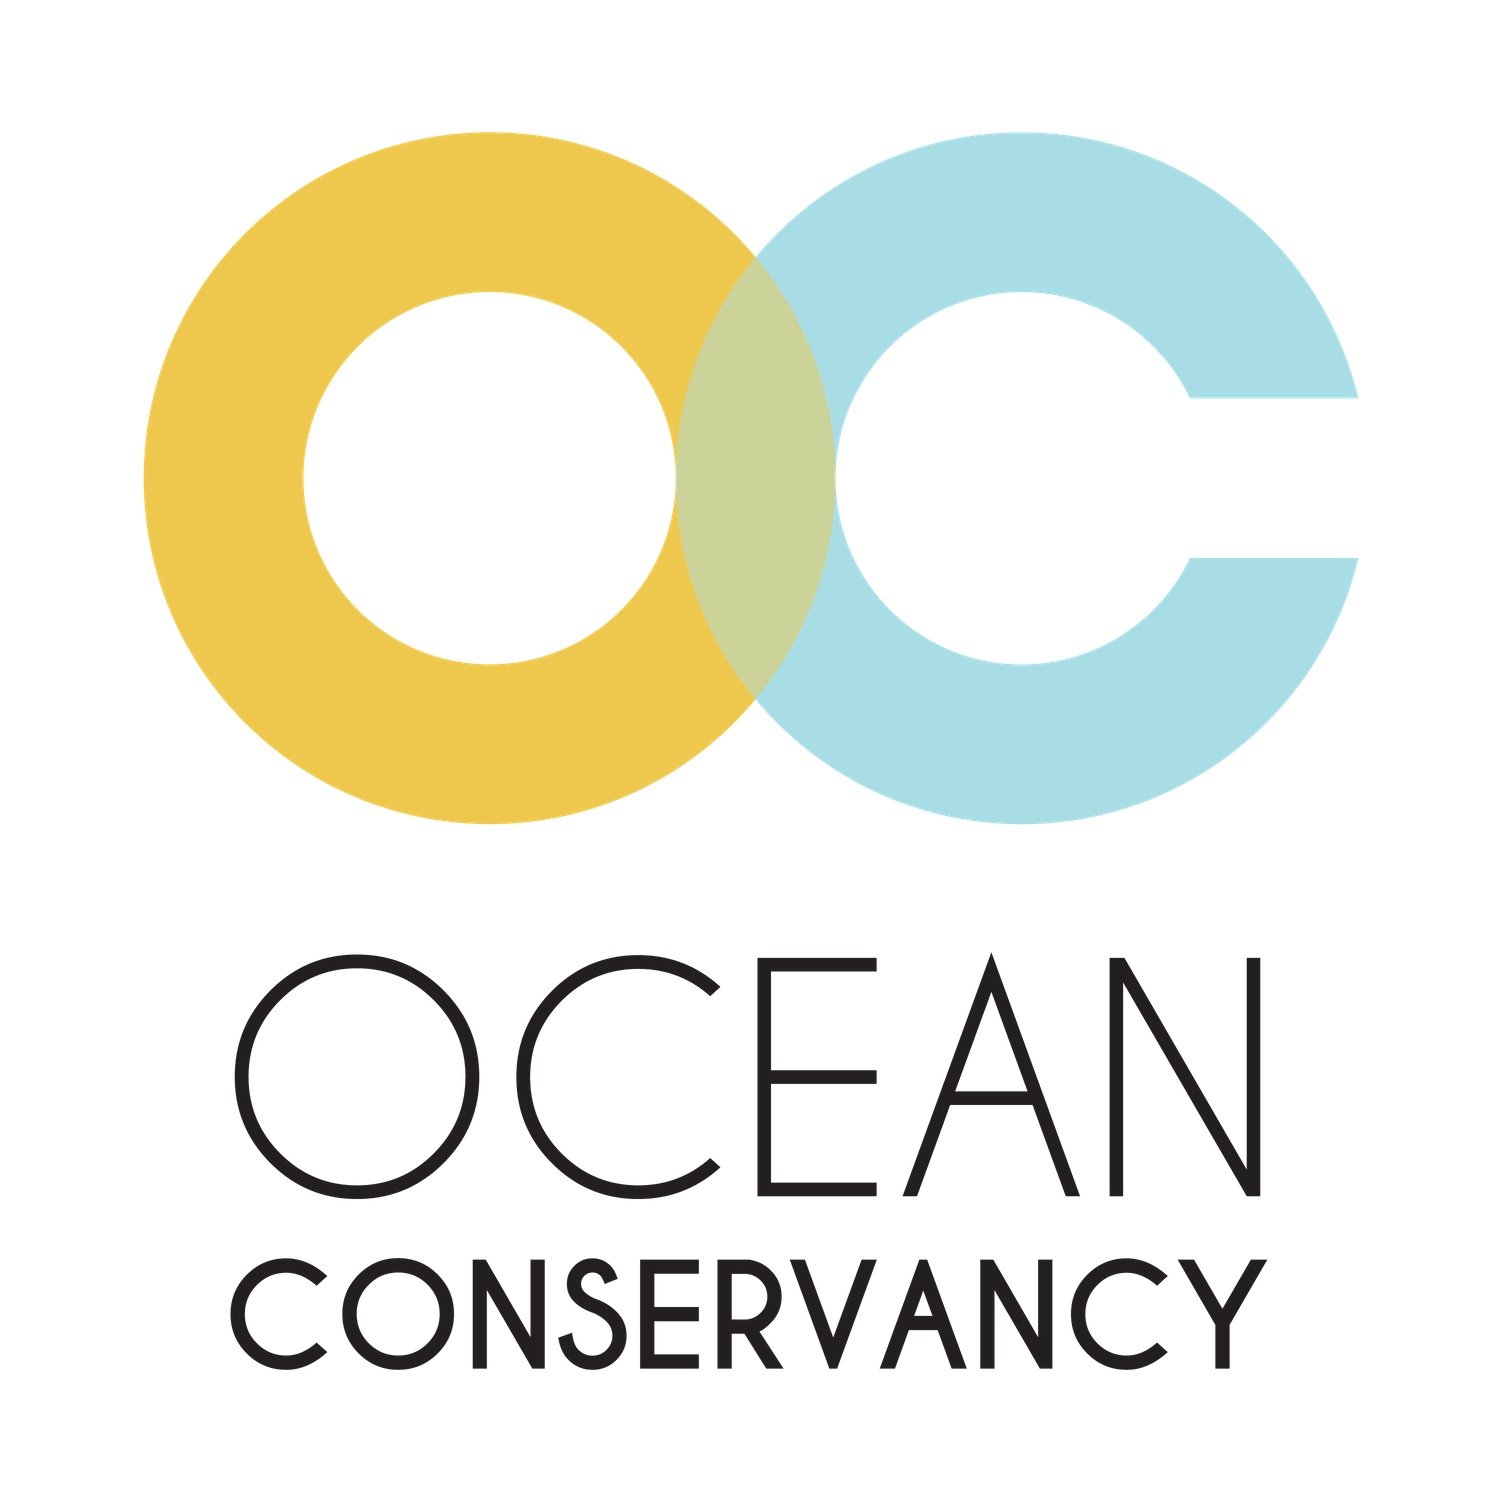 The New Ocean Conservancy logo, a bold letter O and C that overlap.